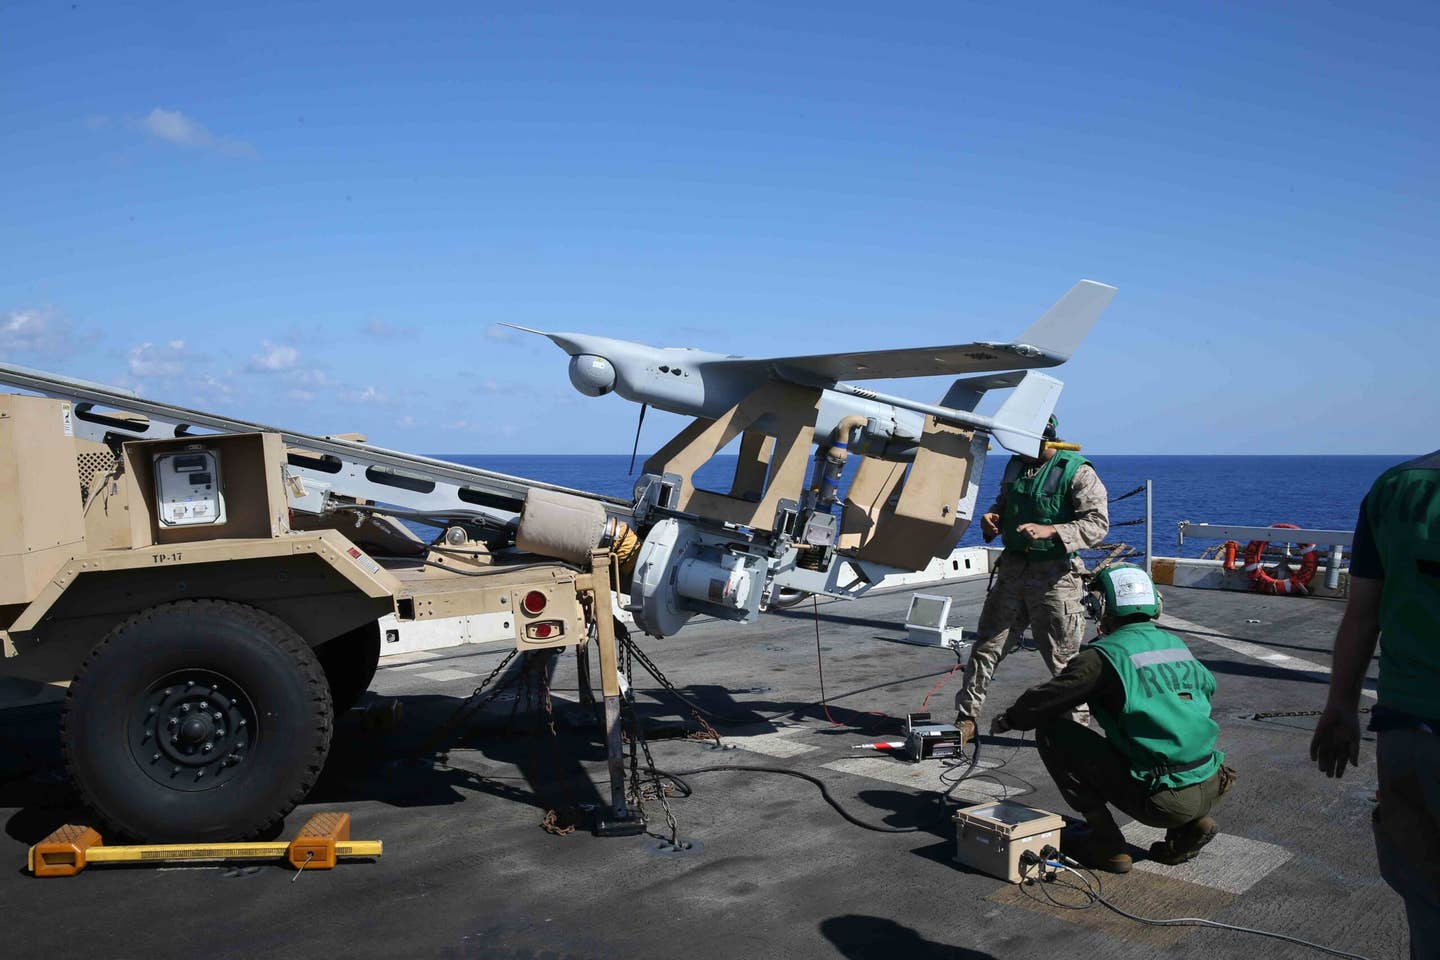 Marines attached to the 15th Marine Expeditionary Unit’s (15th MEU) Unmanned Aerial Surveillance unit launch an RQ-21A Blackjack small tactical unmanned aircraft system aboard the <em>San Antonio</em> class amphibious transport dock ship USS <em>San Diego</em> (LPD-22), September 26, 2017.  <em>U.S. Marine Corps photo by Lance Cpl. Jeremy Laboy/Released</em>